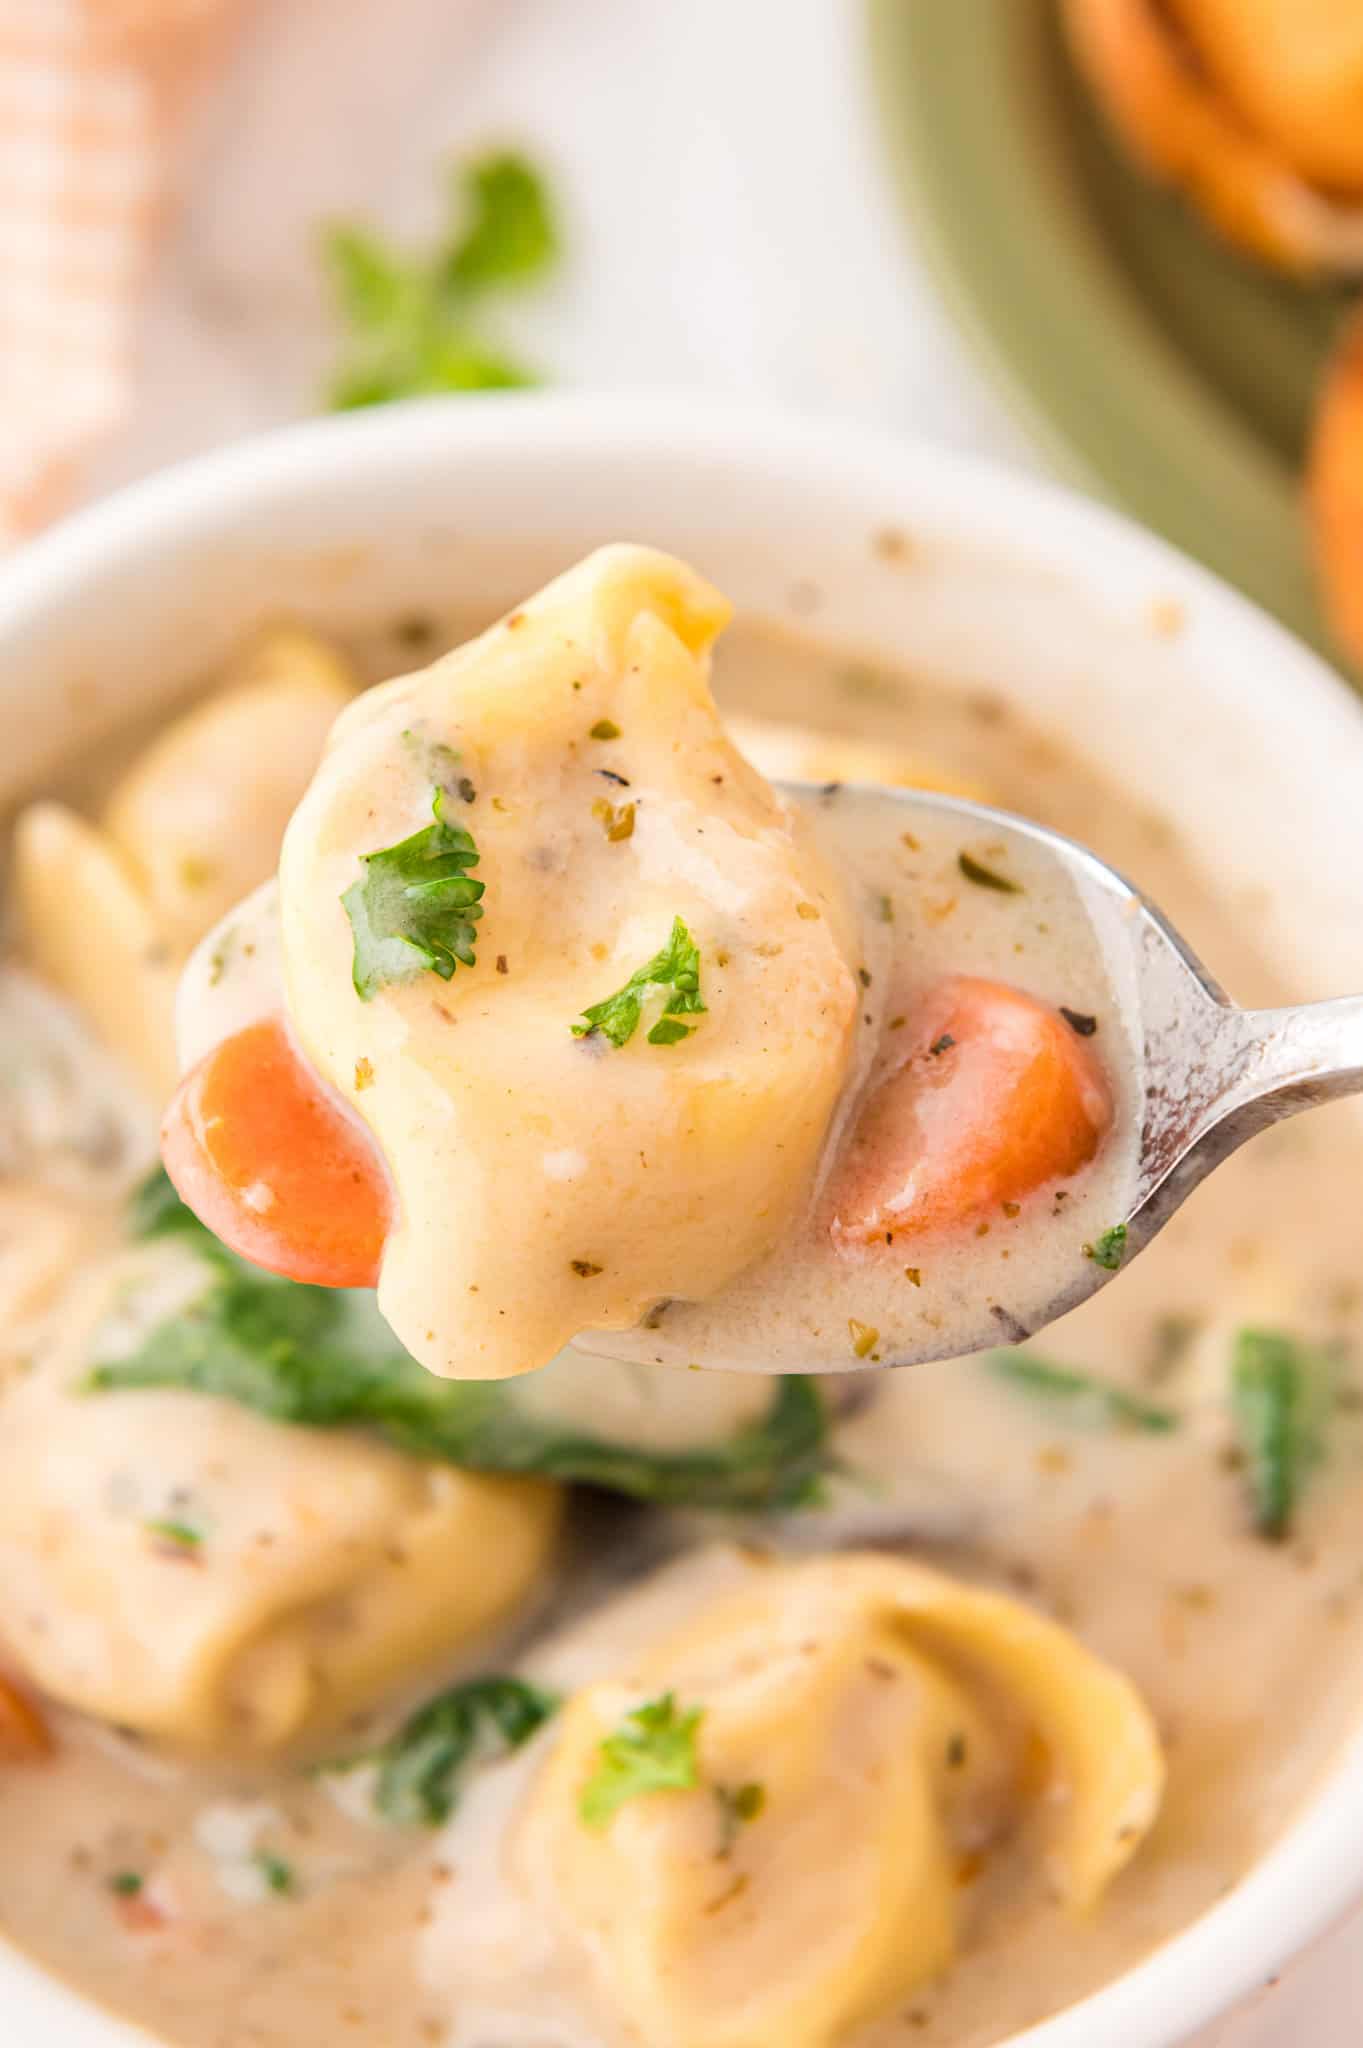 Creamy Tortellini Soup with Sausage is a hearty soup recipe loaded with store bought tortellini, chunks of sausage, mushrooms, carrots and spinach.